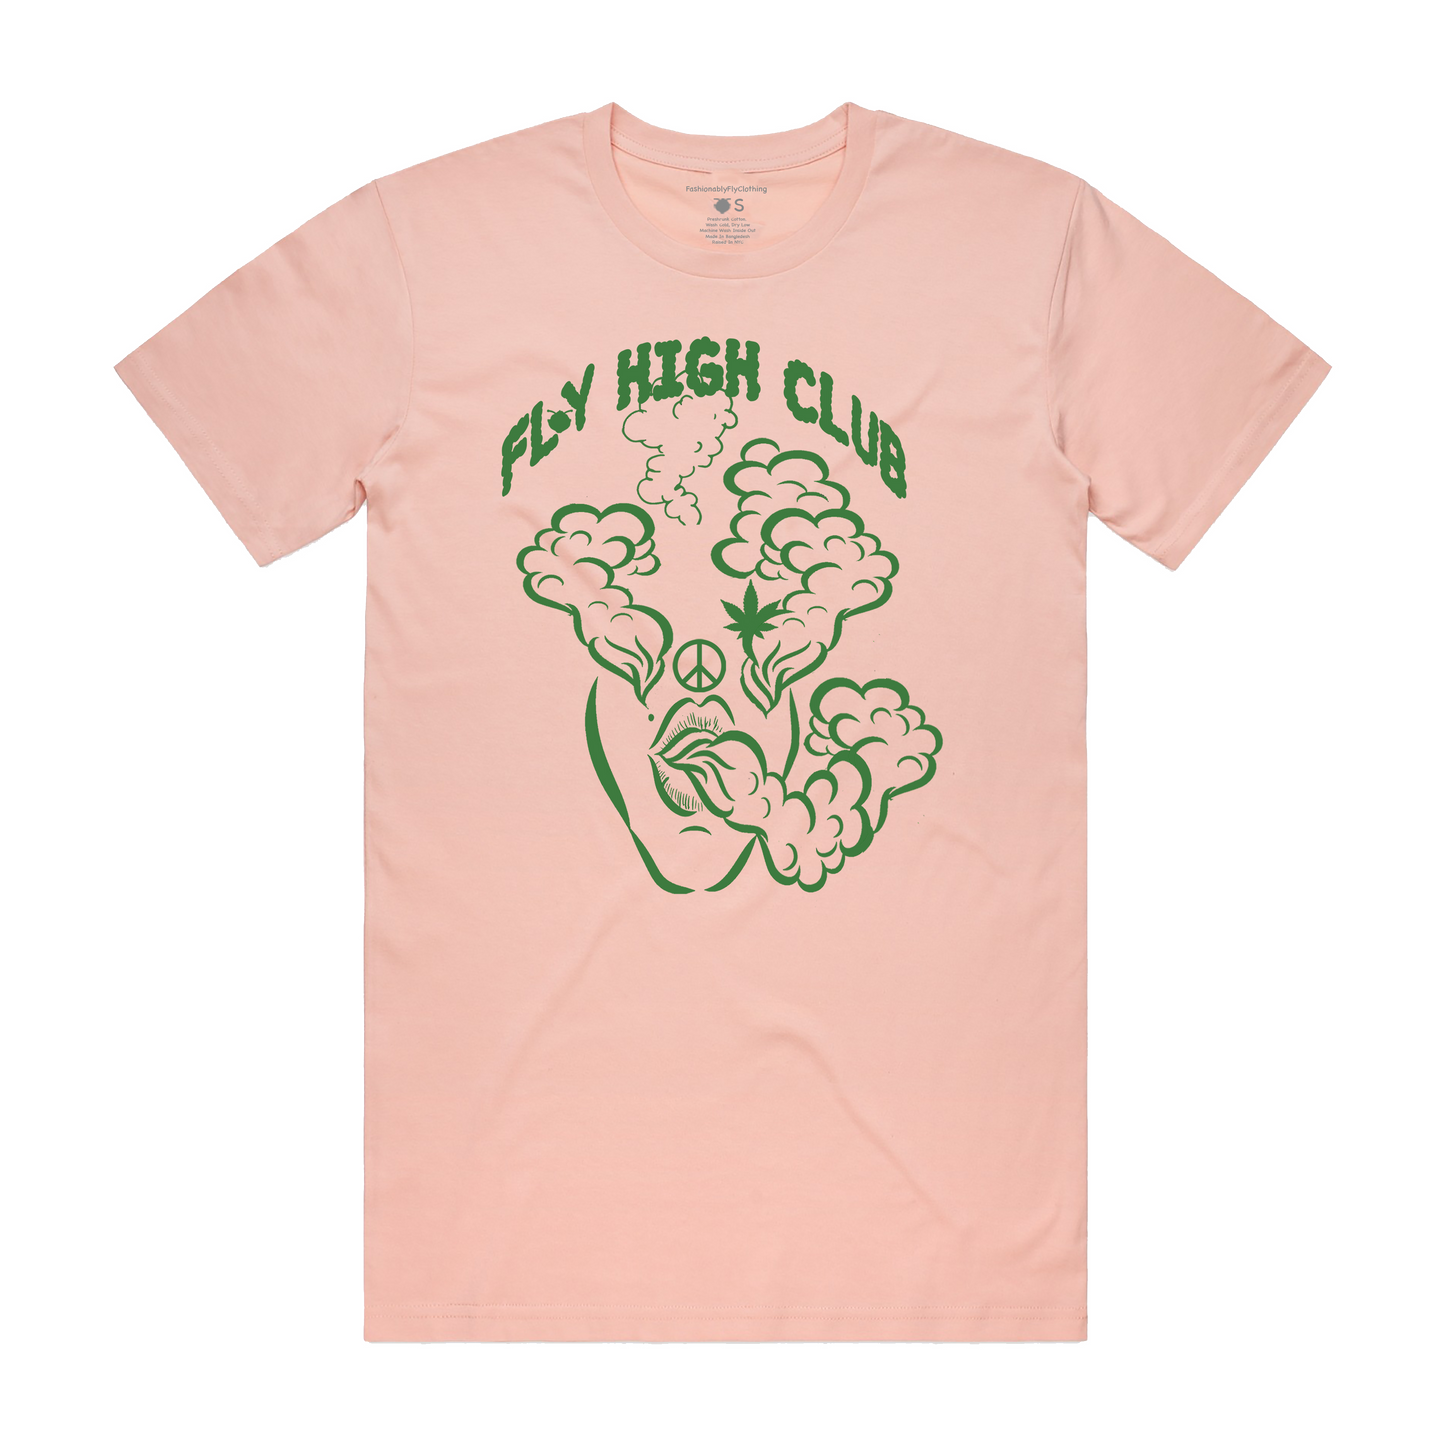 Fly High Club Unisex T-Shirt - Pale Pink